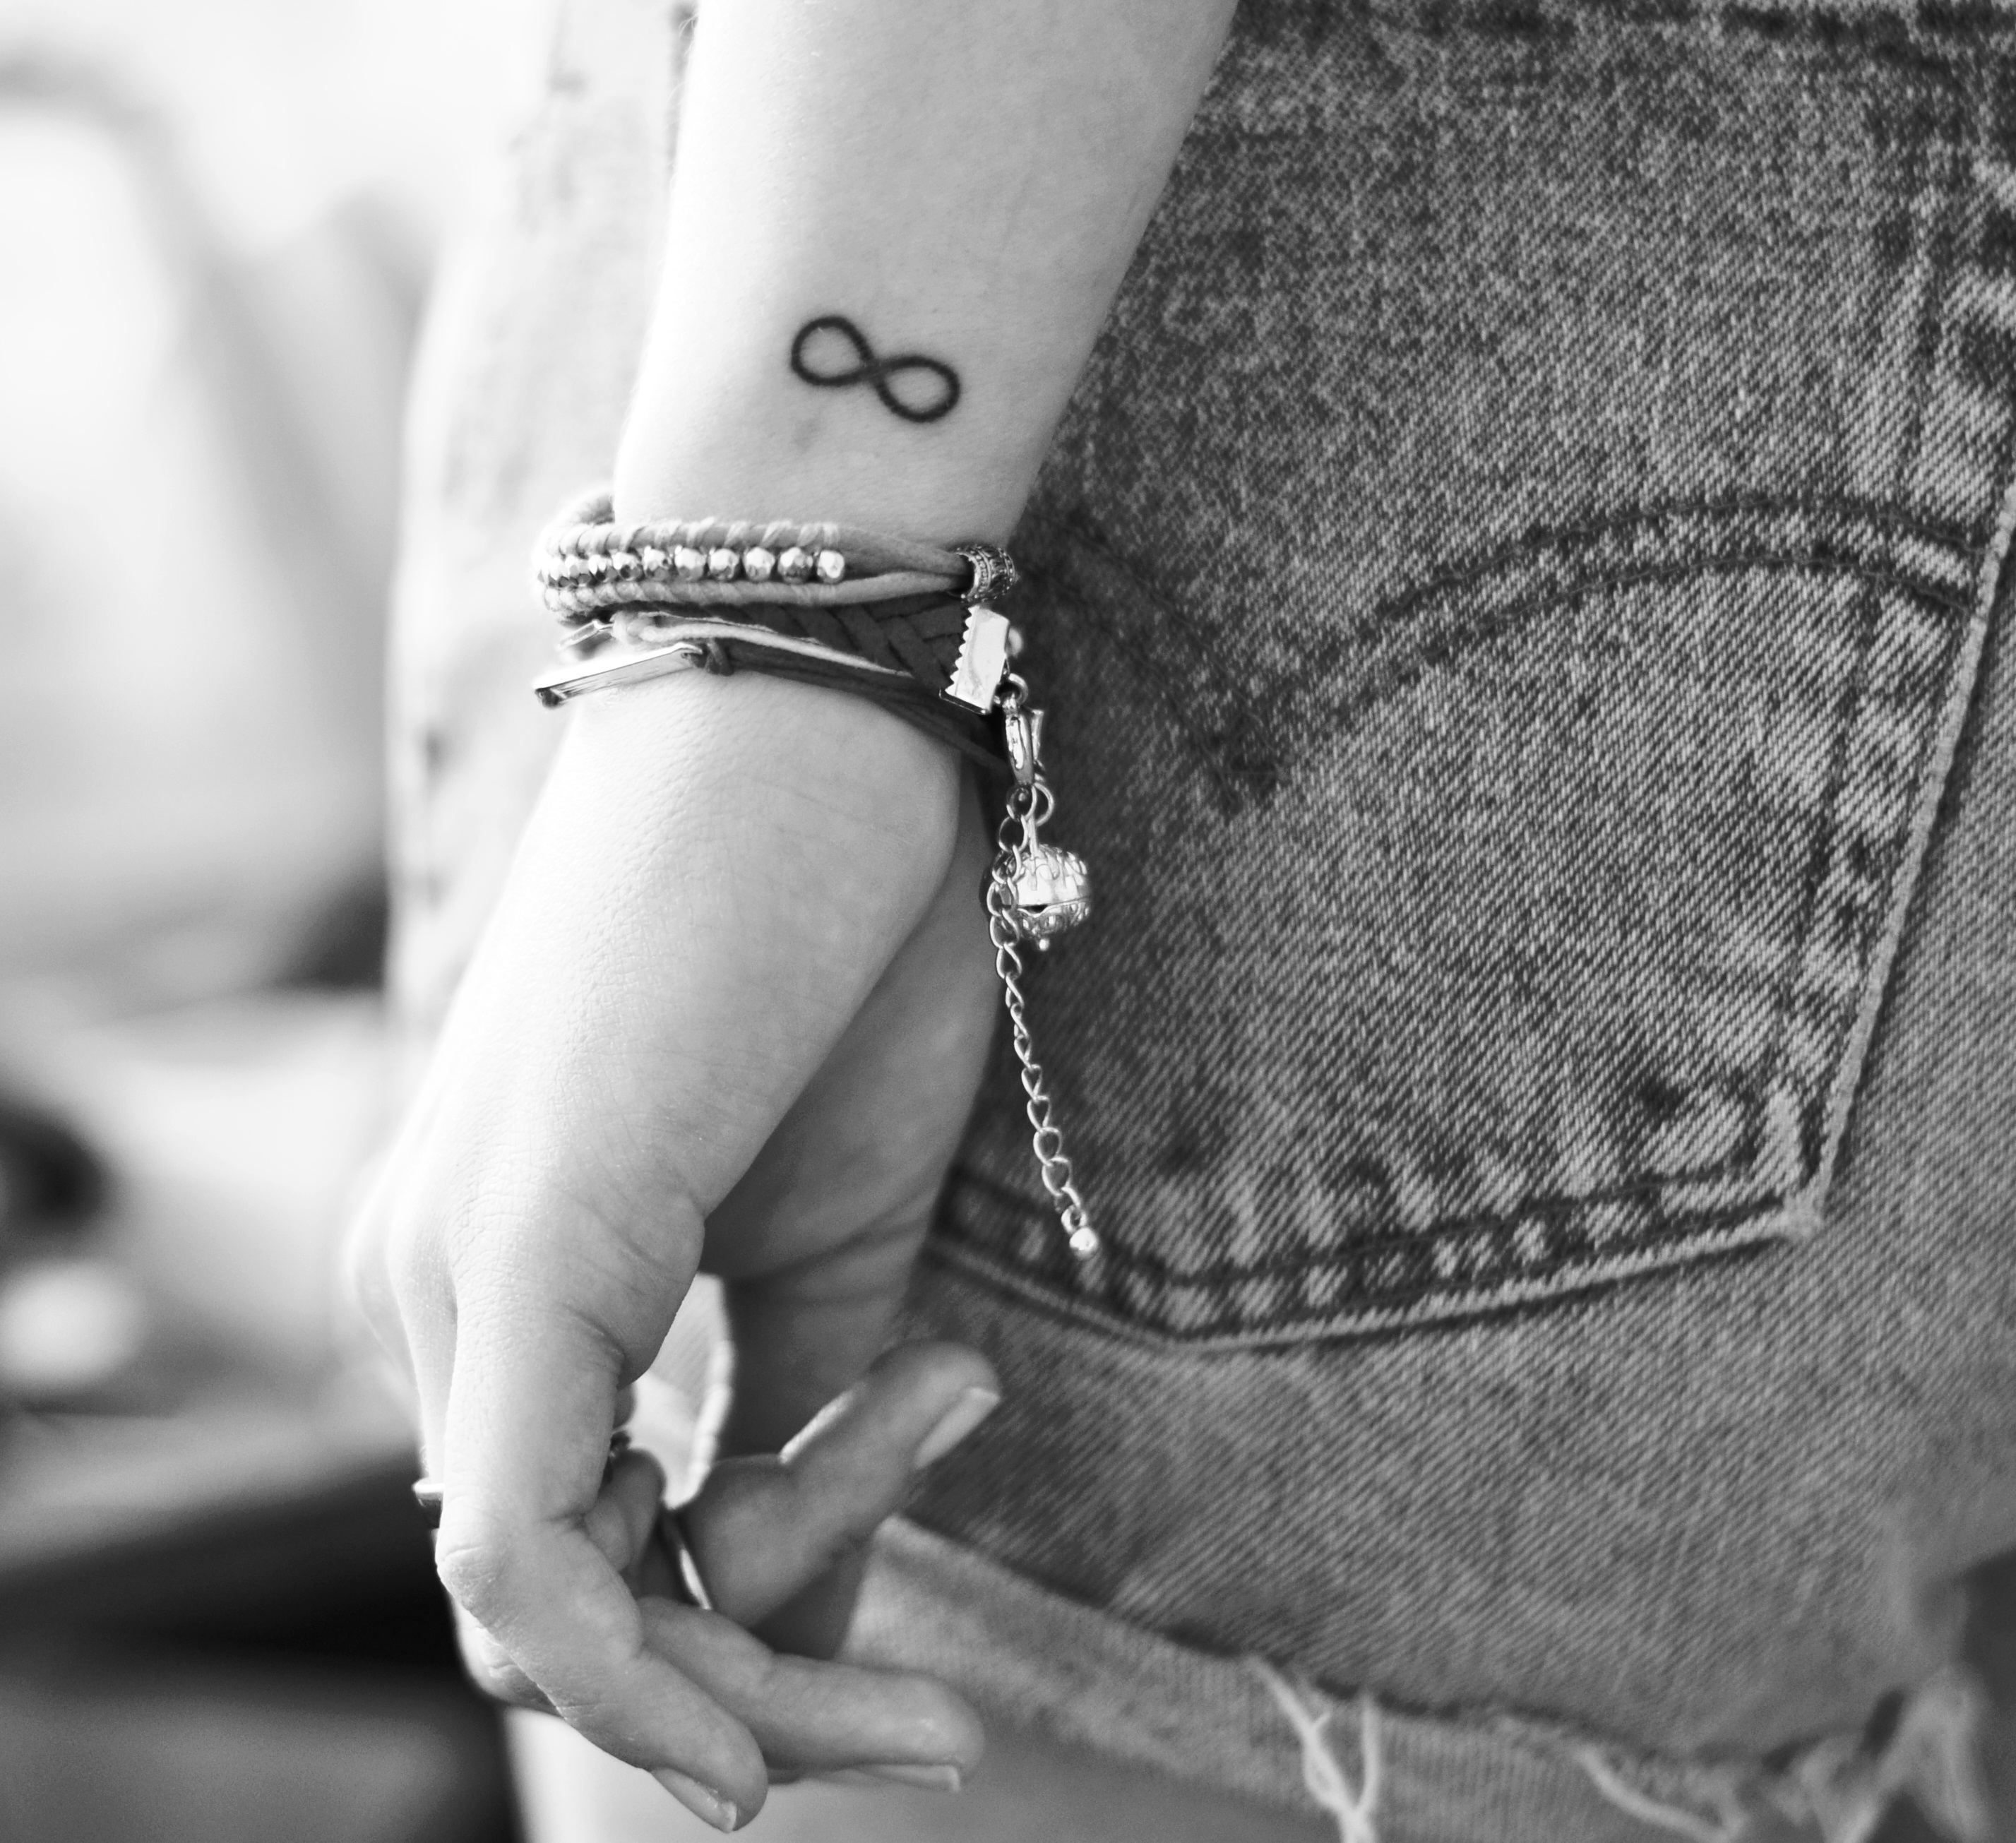 Infinity Tattoos Designs, Ideas and Meaning | Tattoos For You